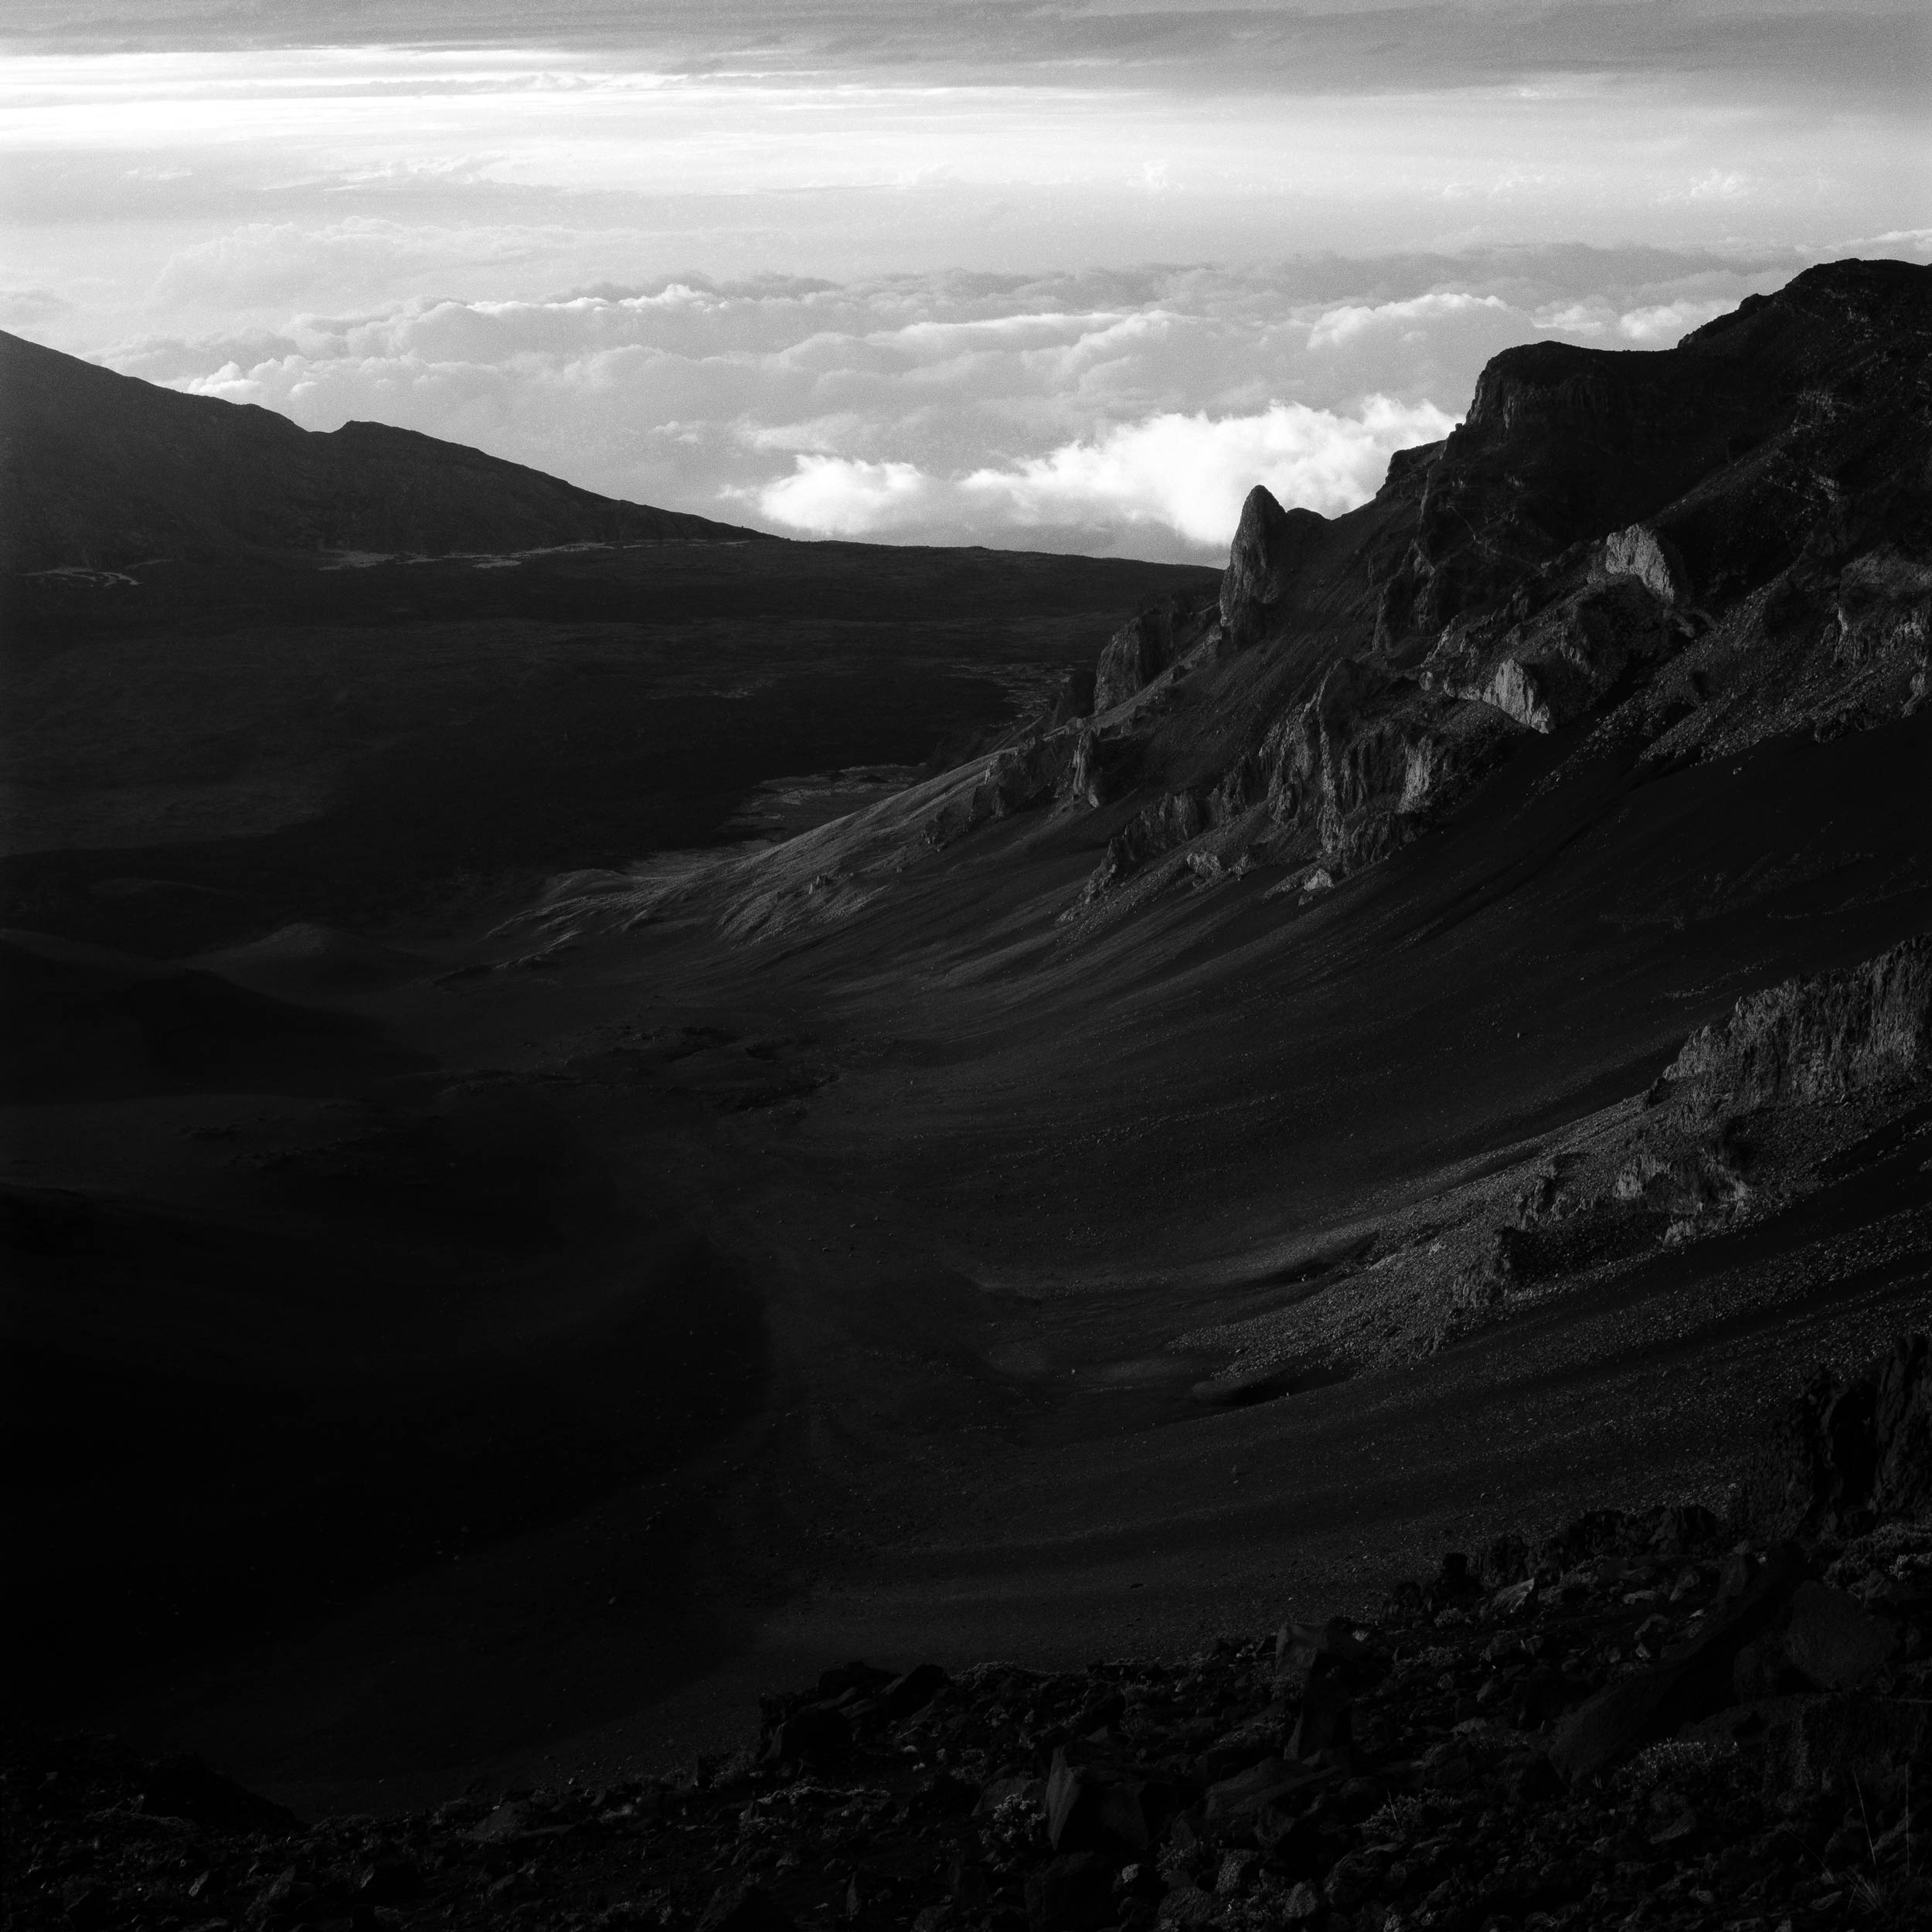 But wait for it is not far, Crater, Maui, Hawaii, 2013